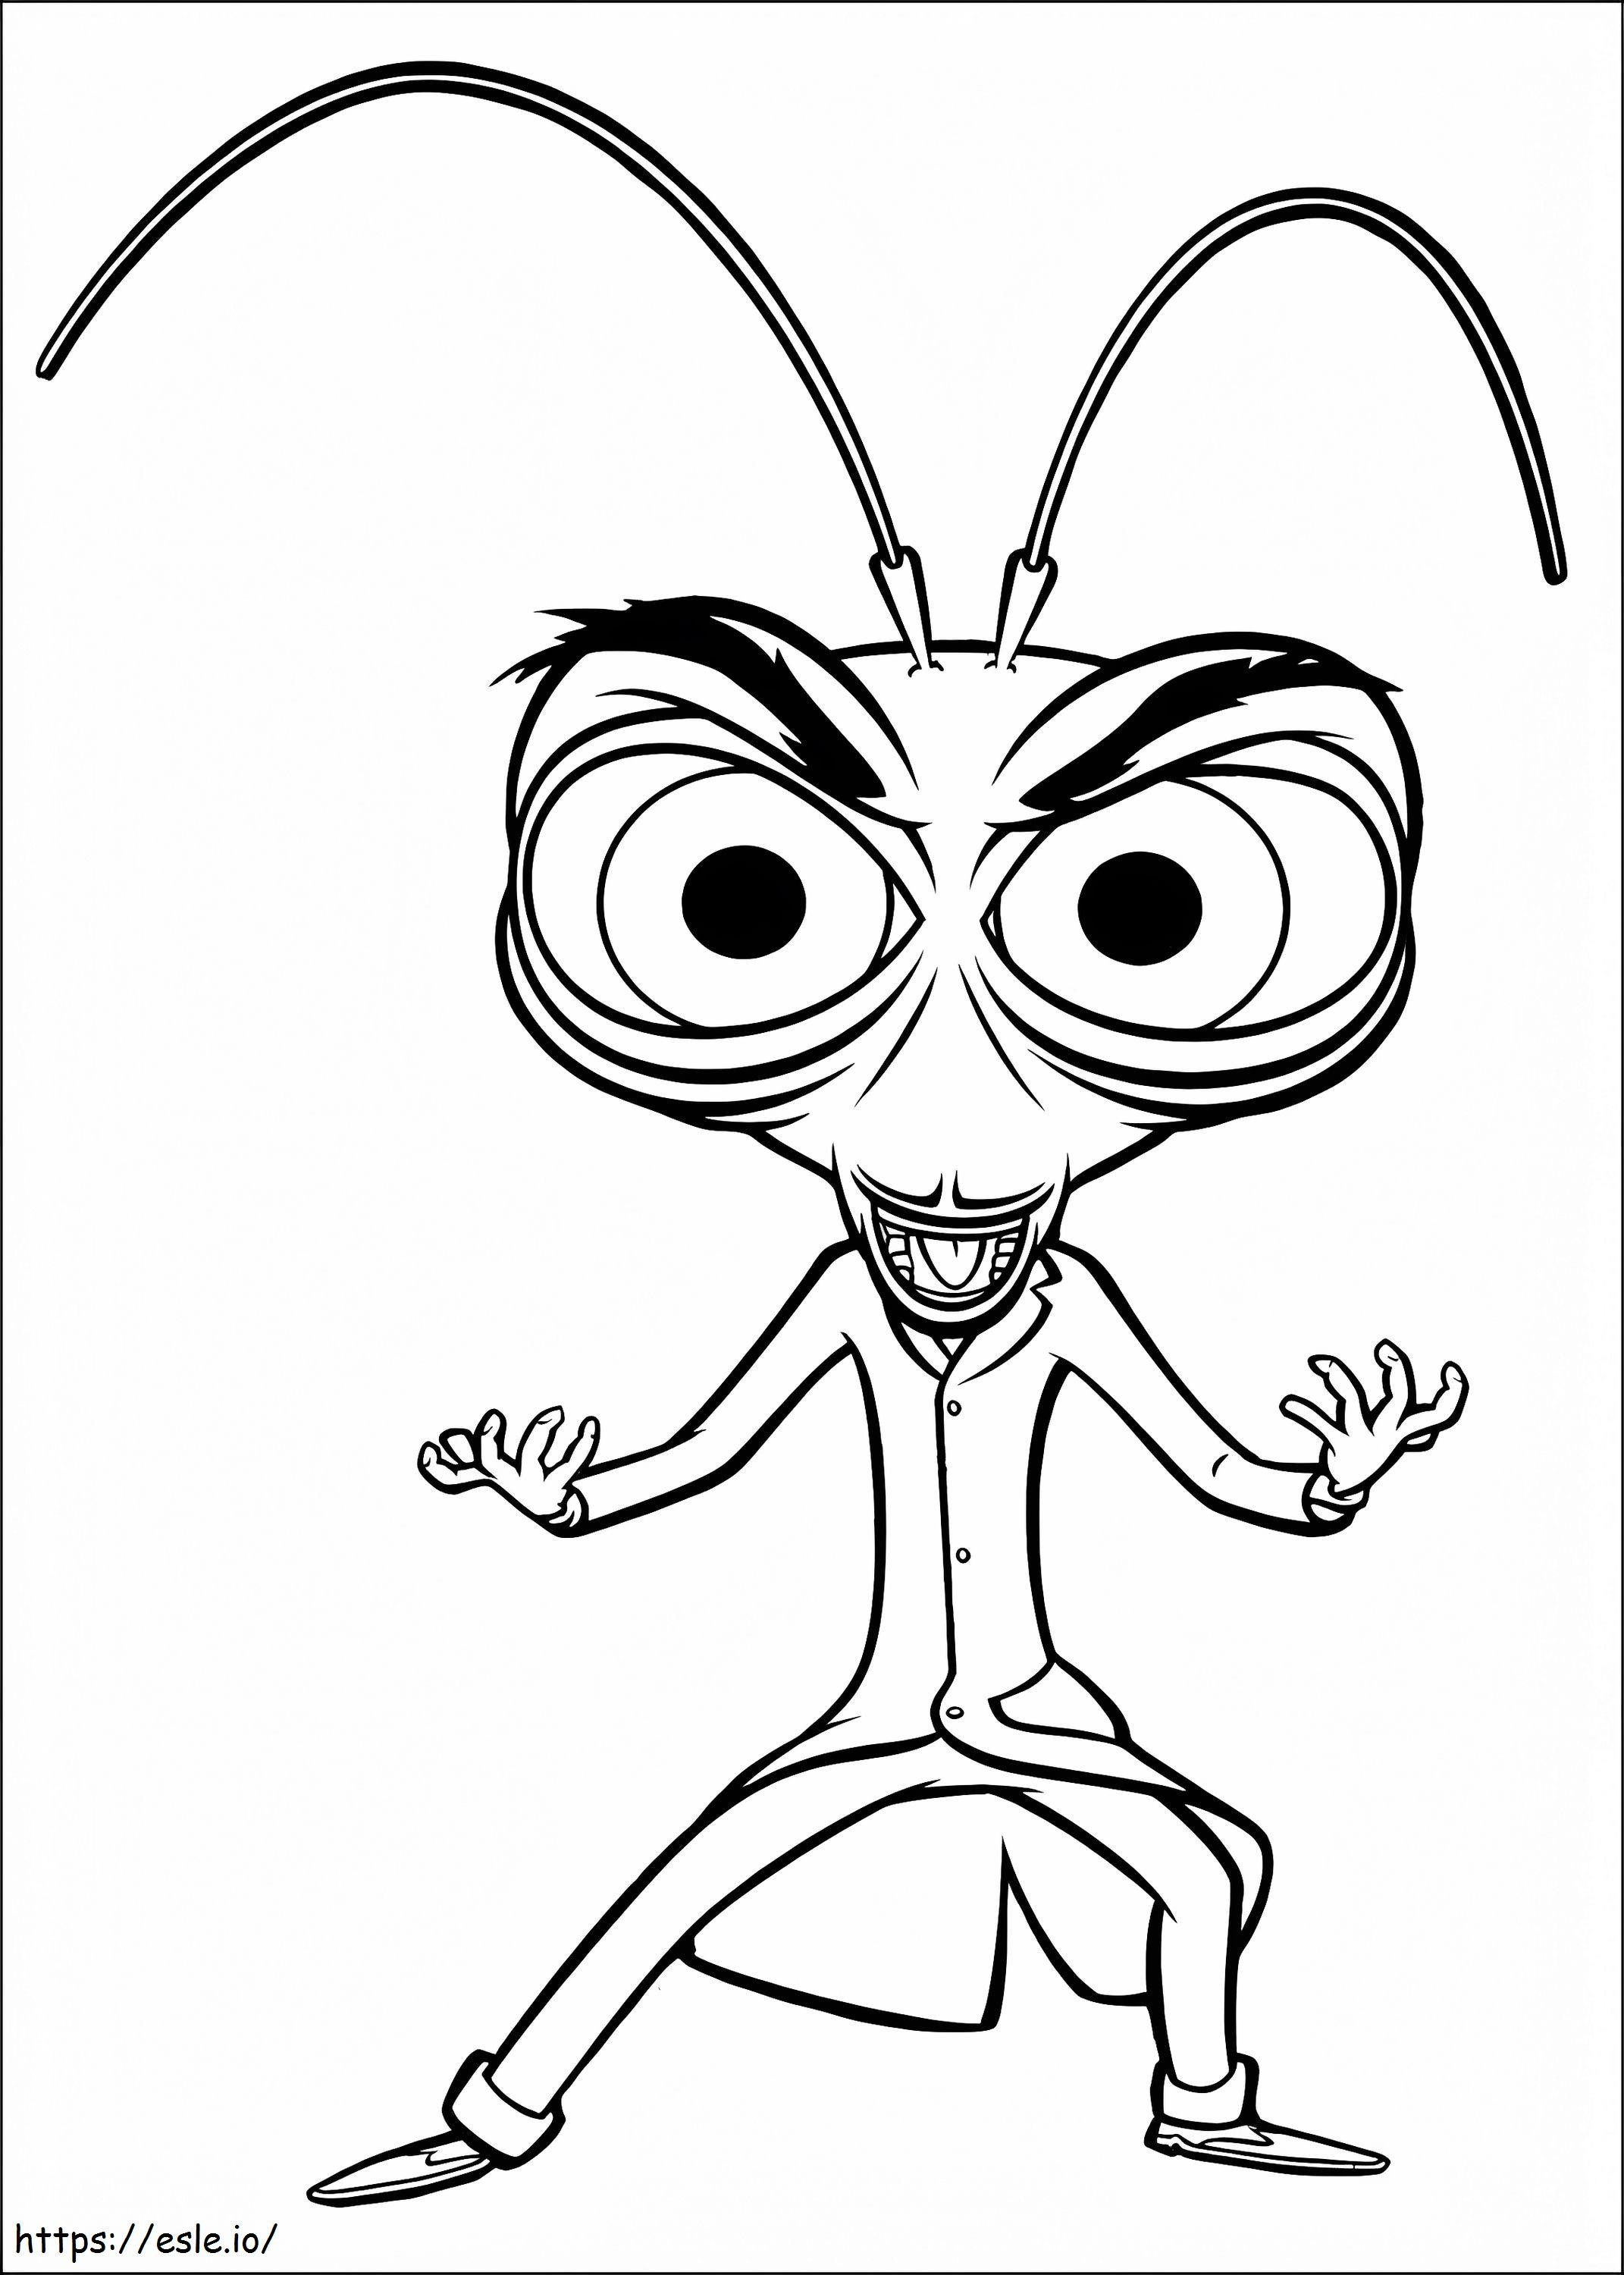 Dr. Cockroach From Monsters Vs Aliens coloring page